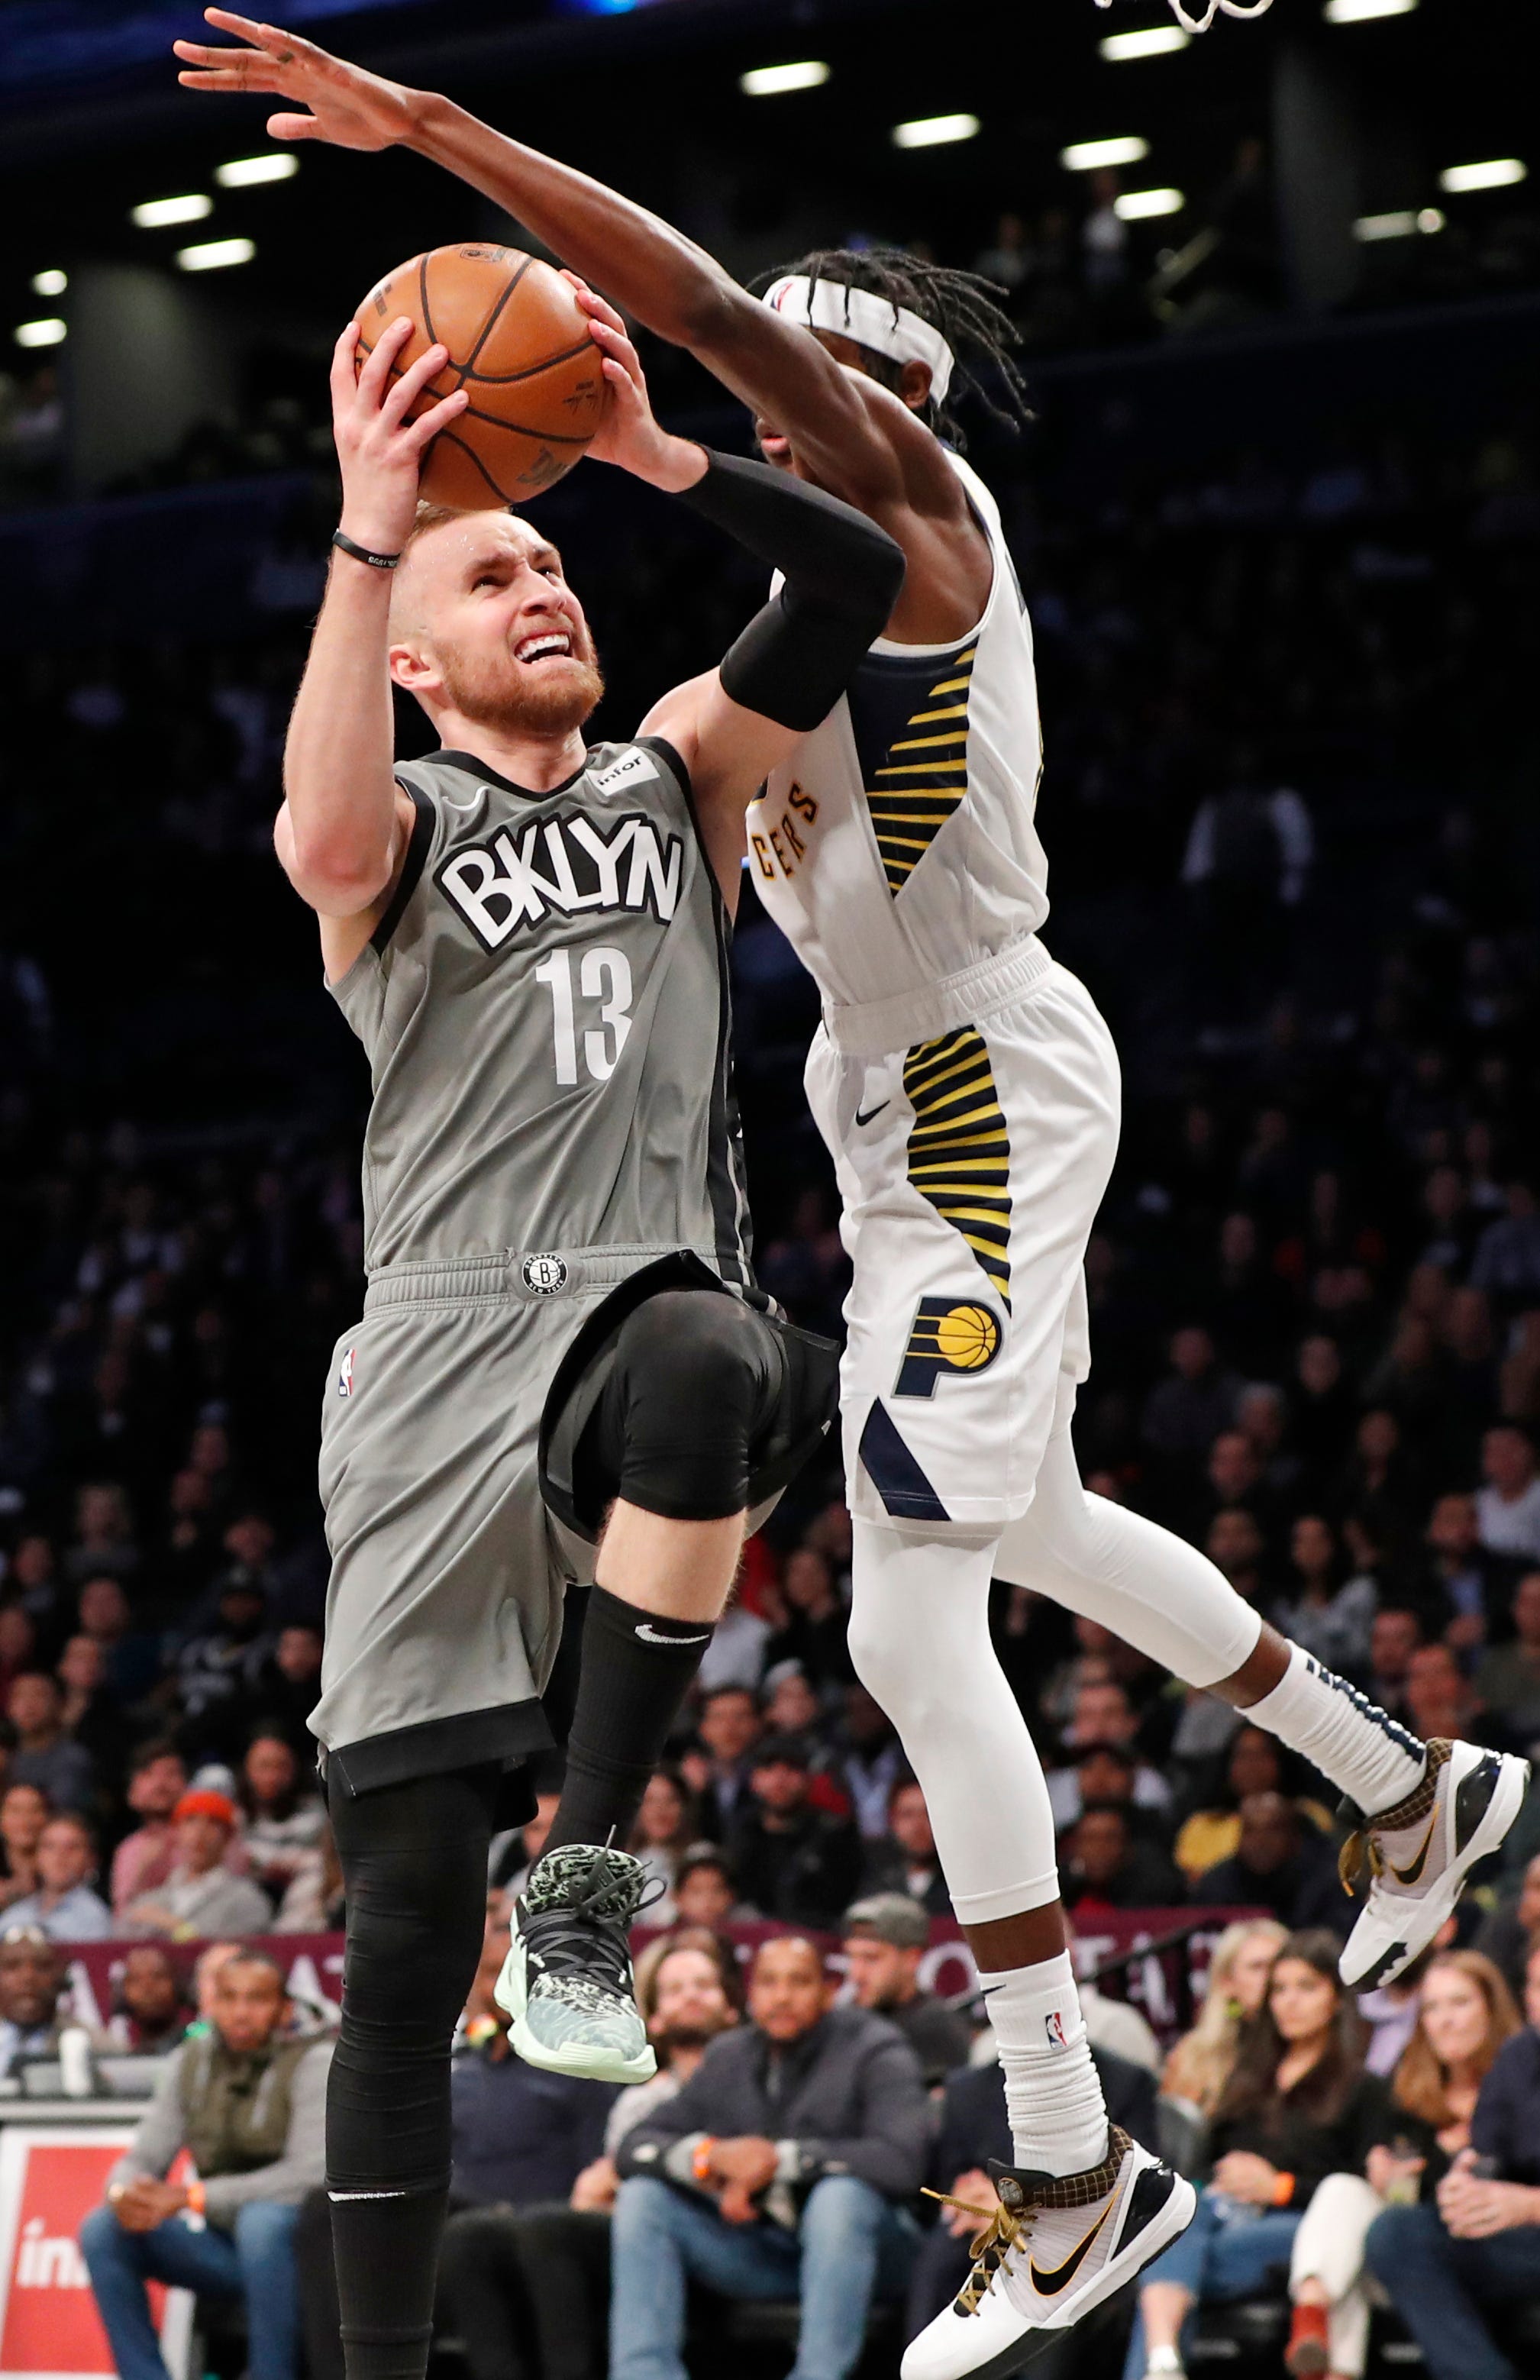 Indiana Pacers forward Justin Holiday, right, defends against Brooklyn Nets guard Dzanan Musa (13) during the second half of an NBA basketball game, Monday, Nov. 18, 2019, in New York.